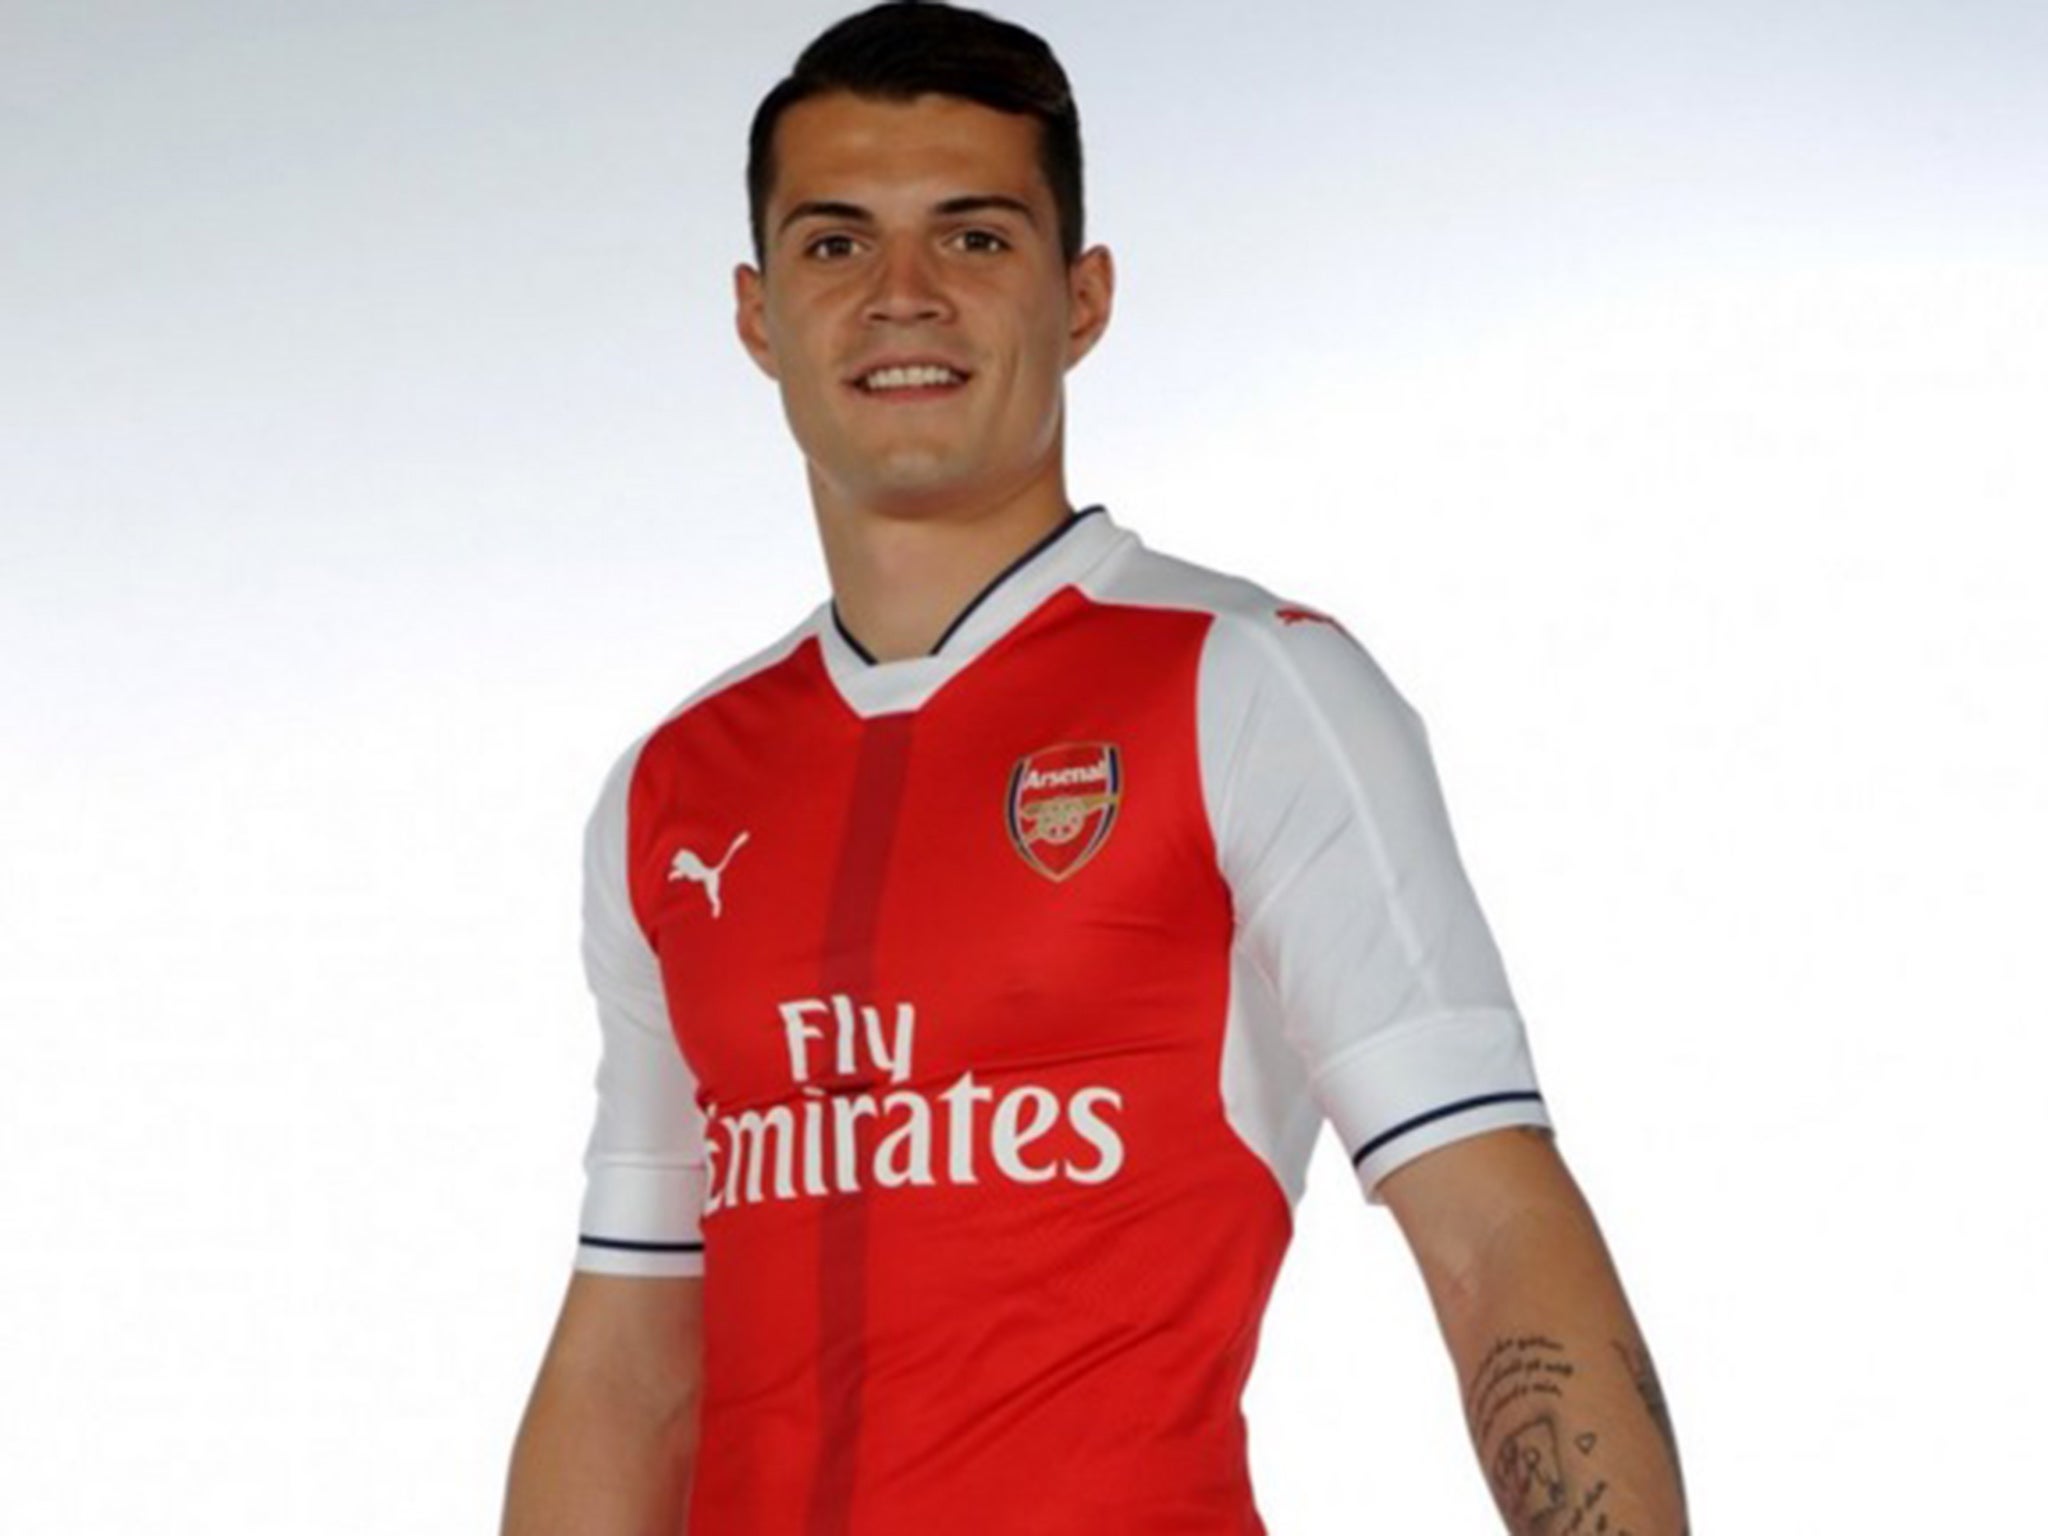 Granit Xhaka is unveiled as an Arsenal player